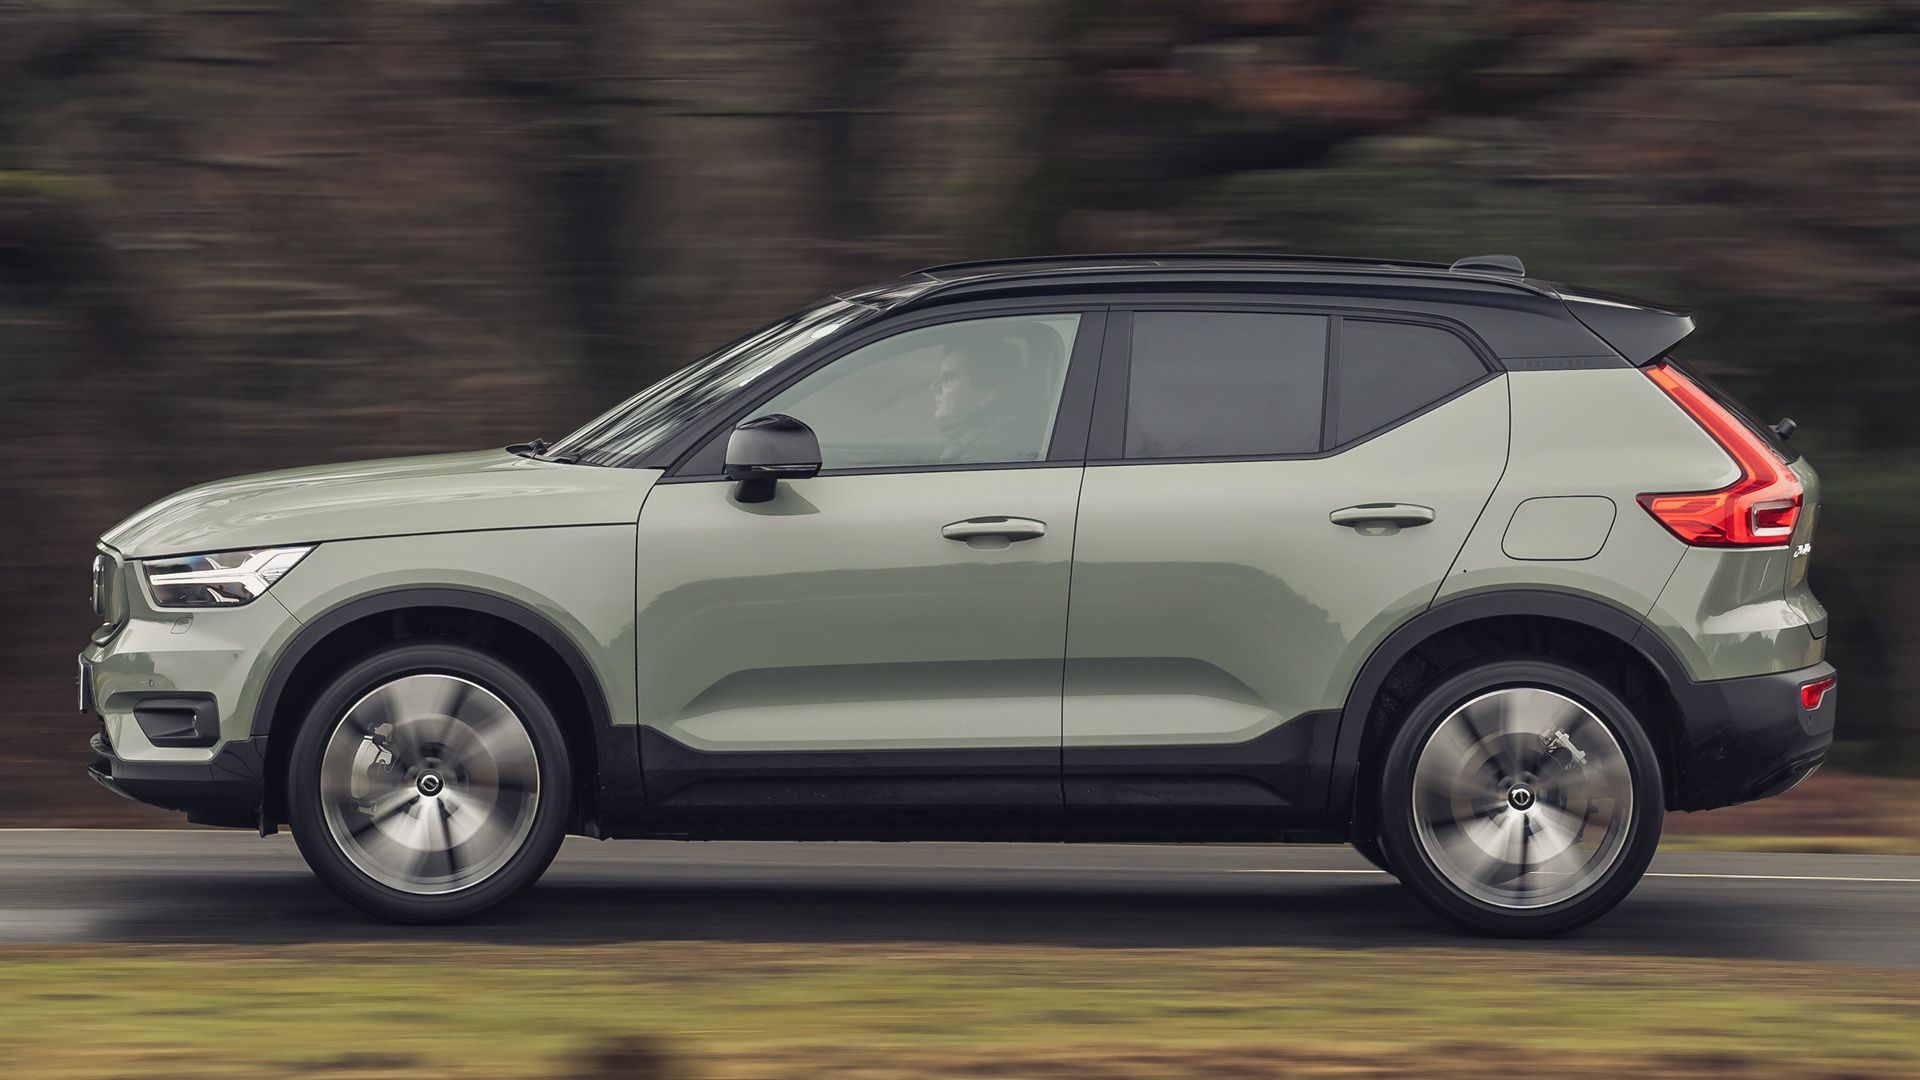 2021 Volvo XC40 Recharge (UK) Wallpapers and HD Images